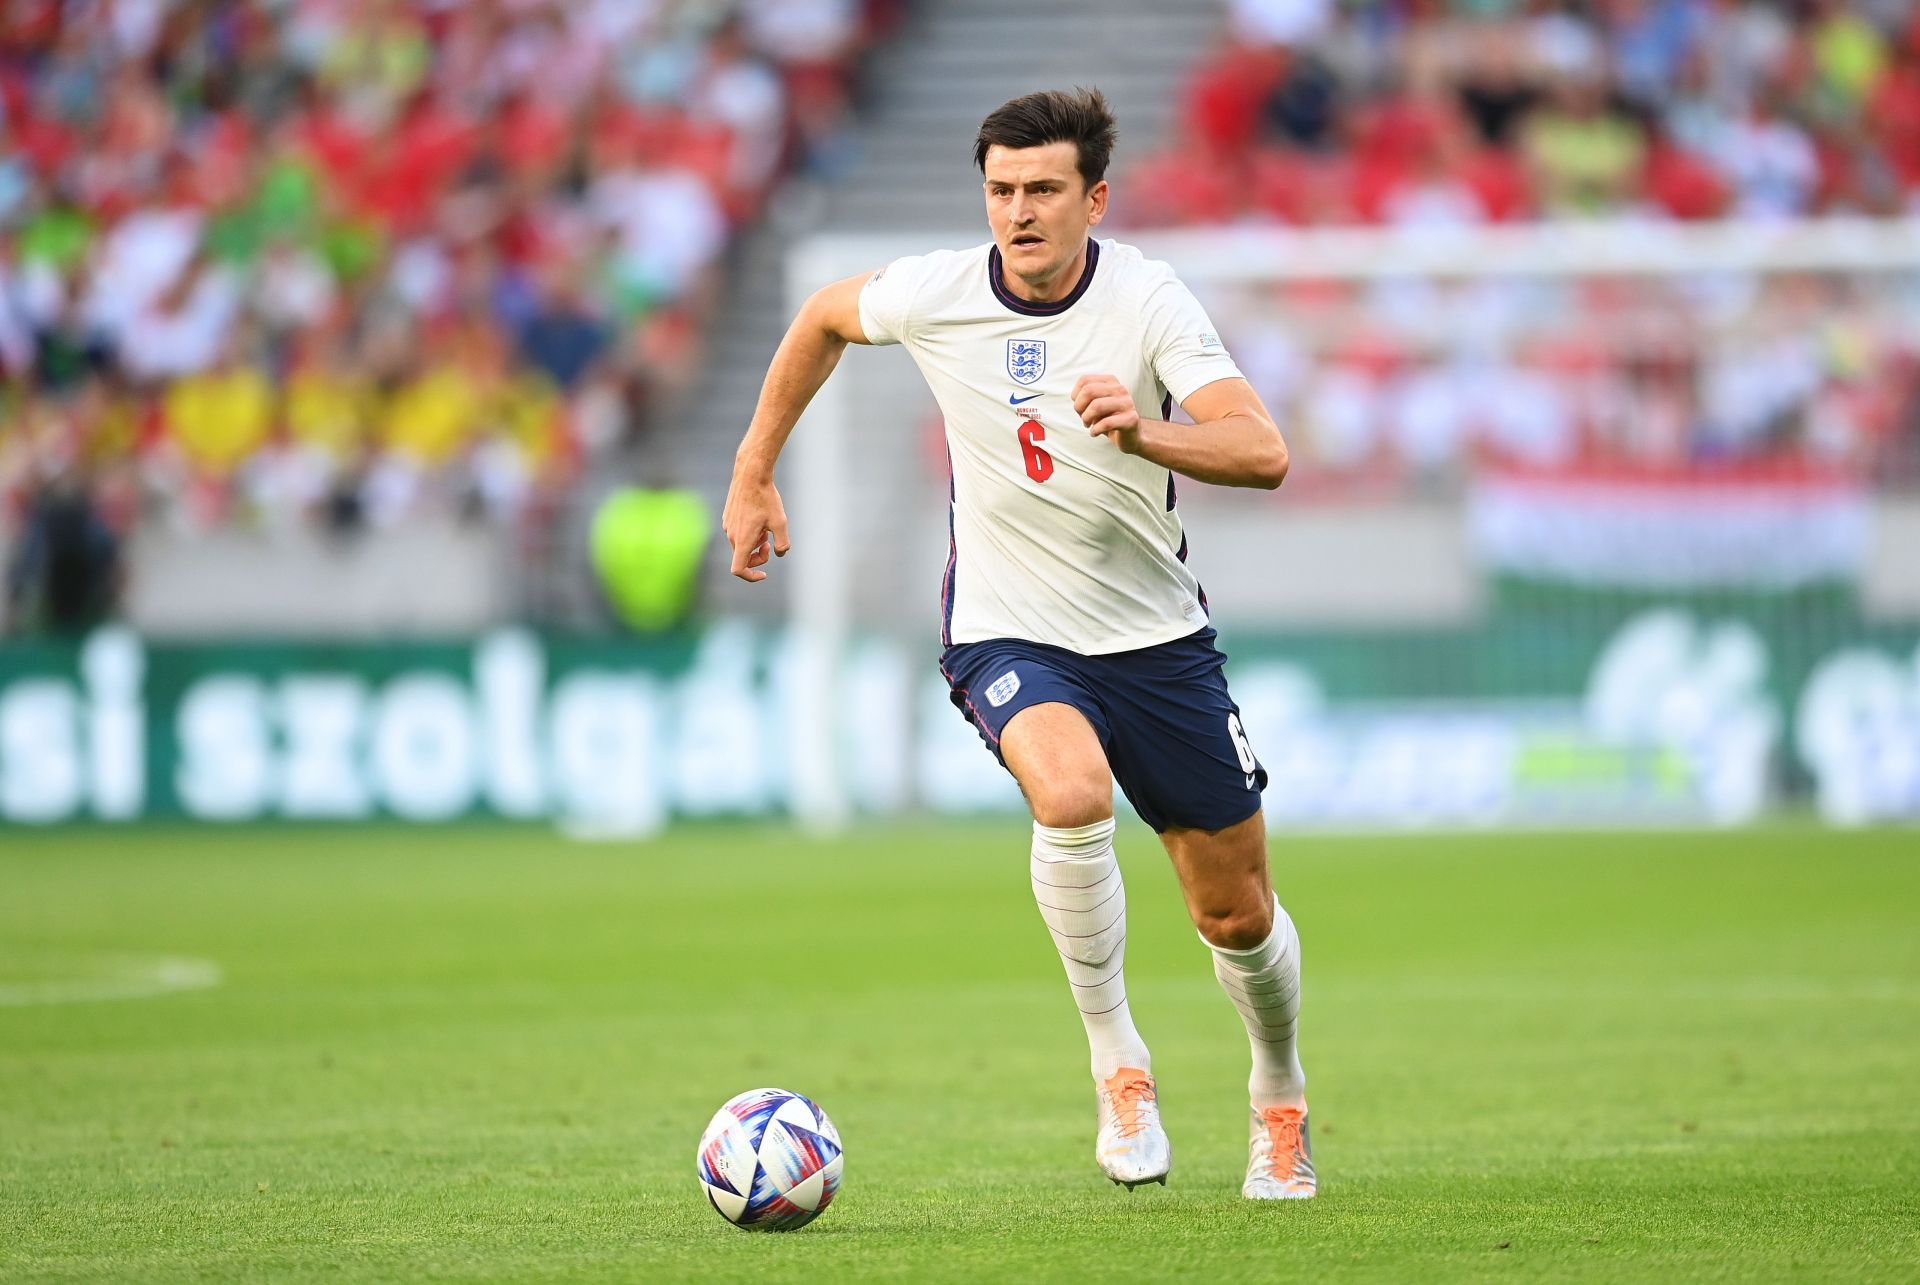 Harry Maguire struggled in the recently concluded season.